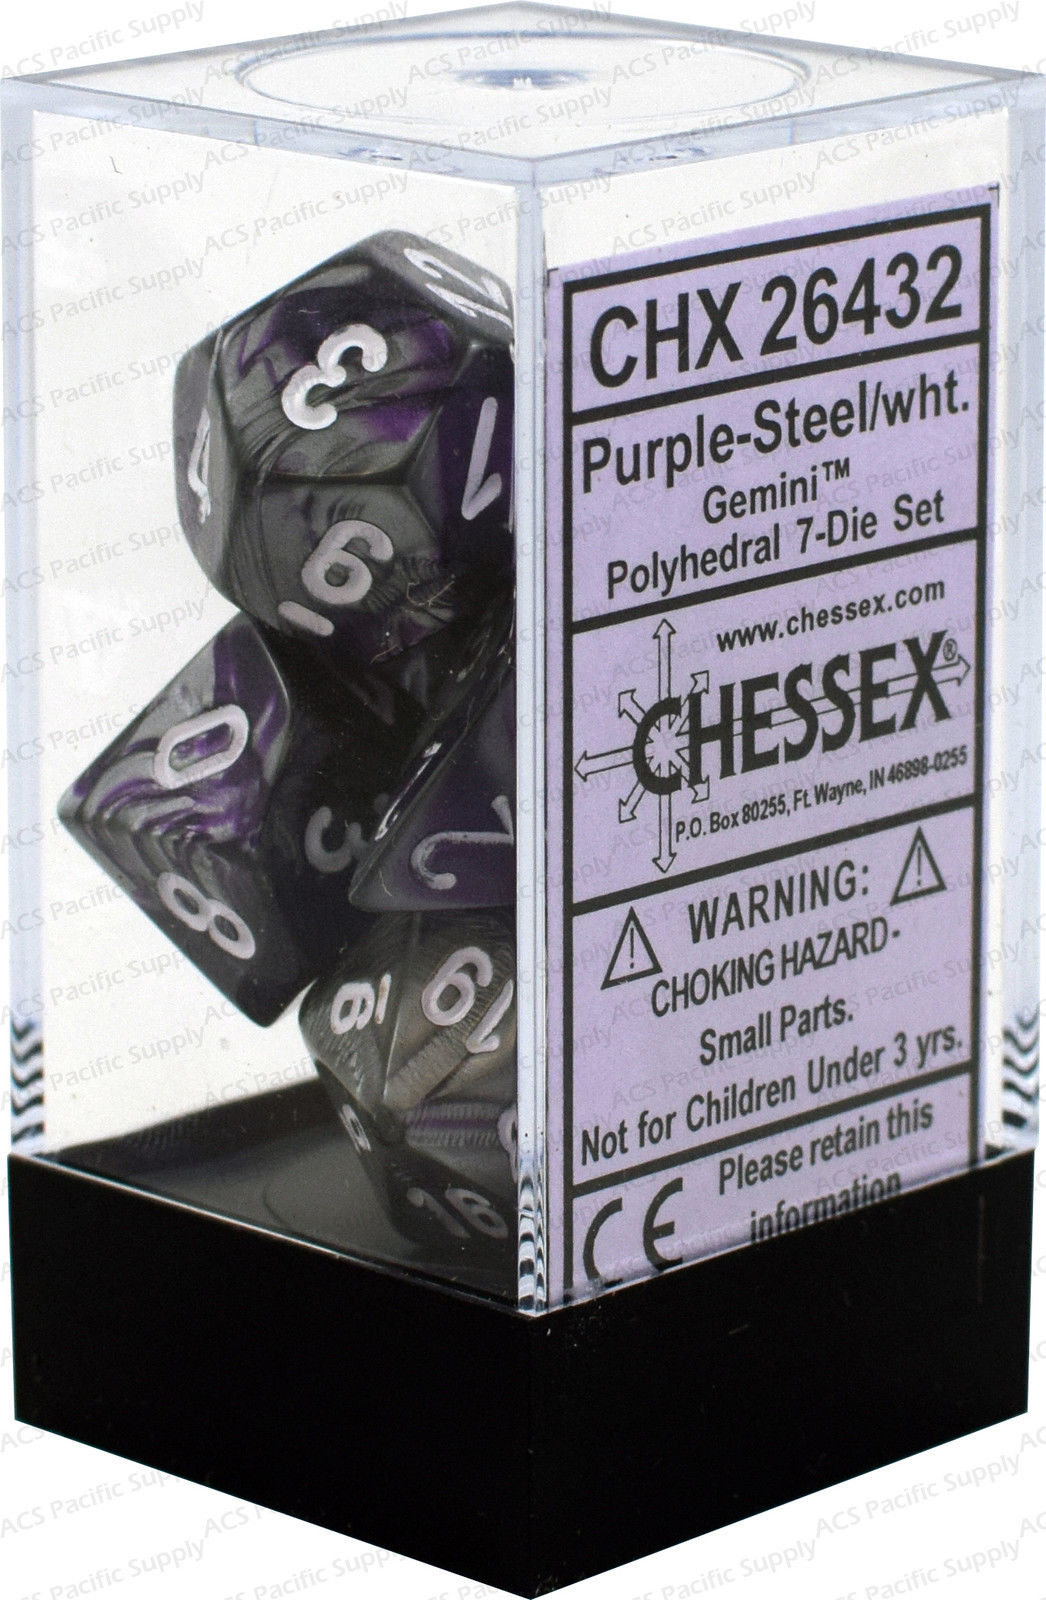 Dice Set of 7 - Chessex Gemini Puprle & Steel with White Numerals CHX 26432